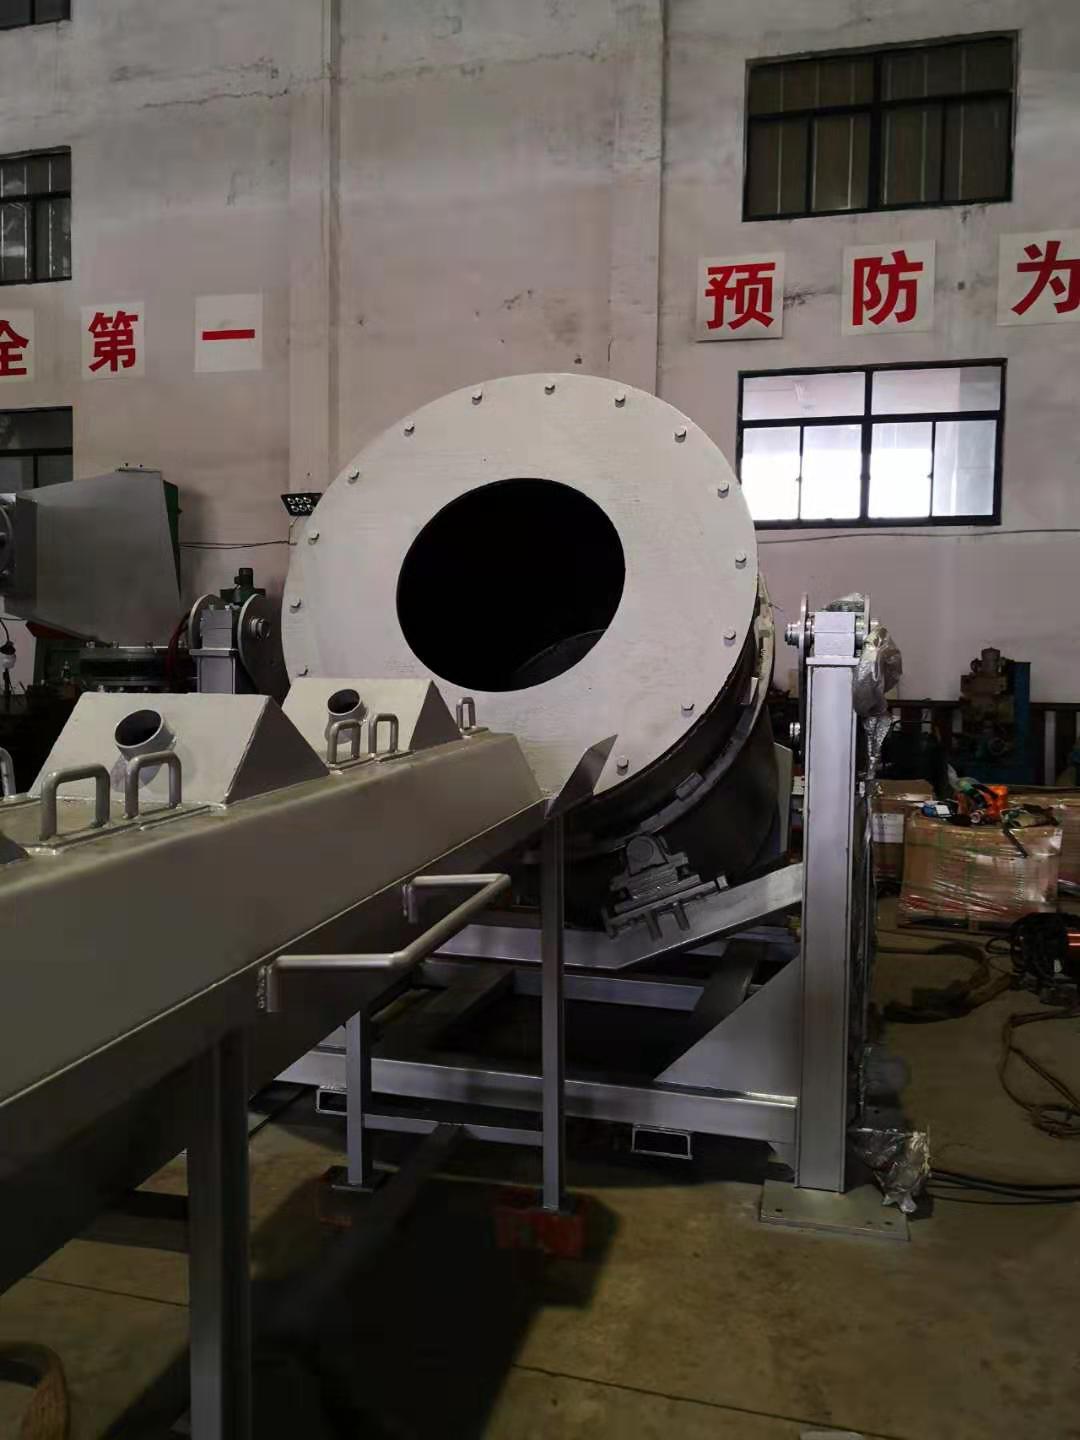 1T 3T 5T Stainless Steel Melting Scrap Gas Melting Rotary Tilting Furnace For Aluminium